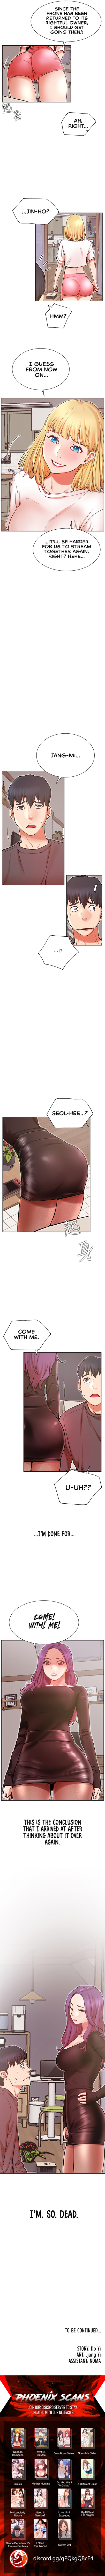 do-you-want-to-collab-chap-34-5